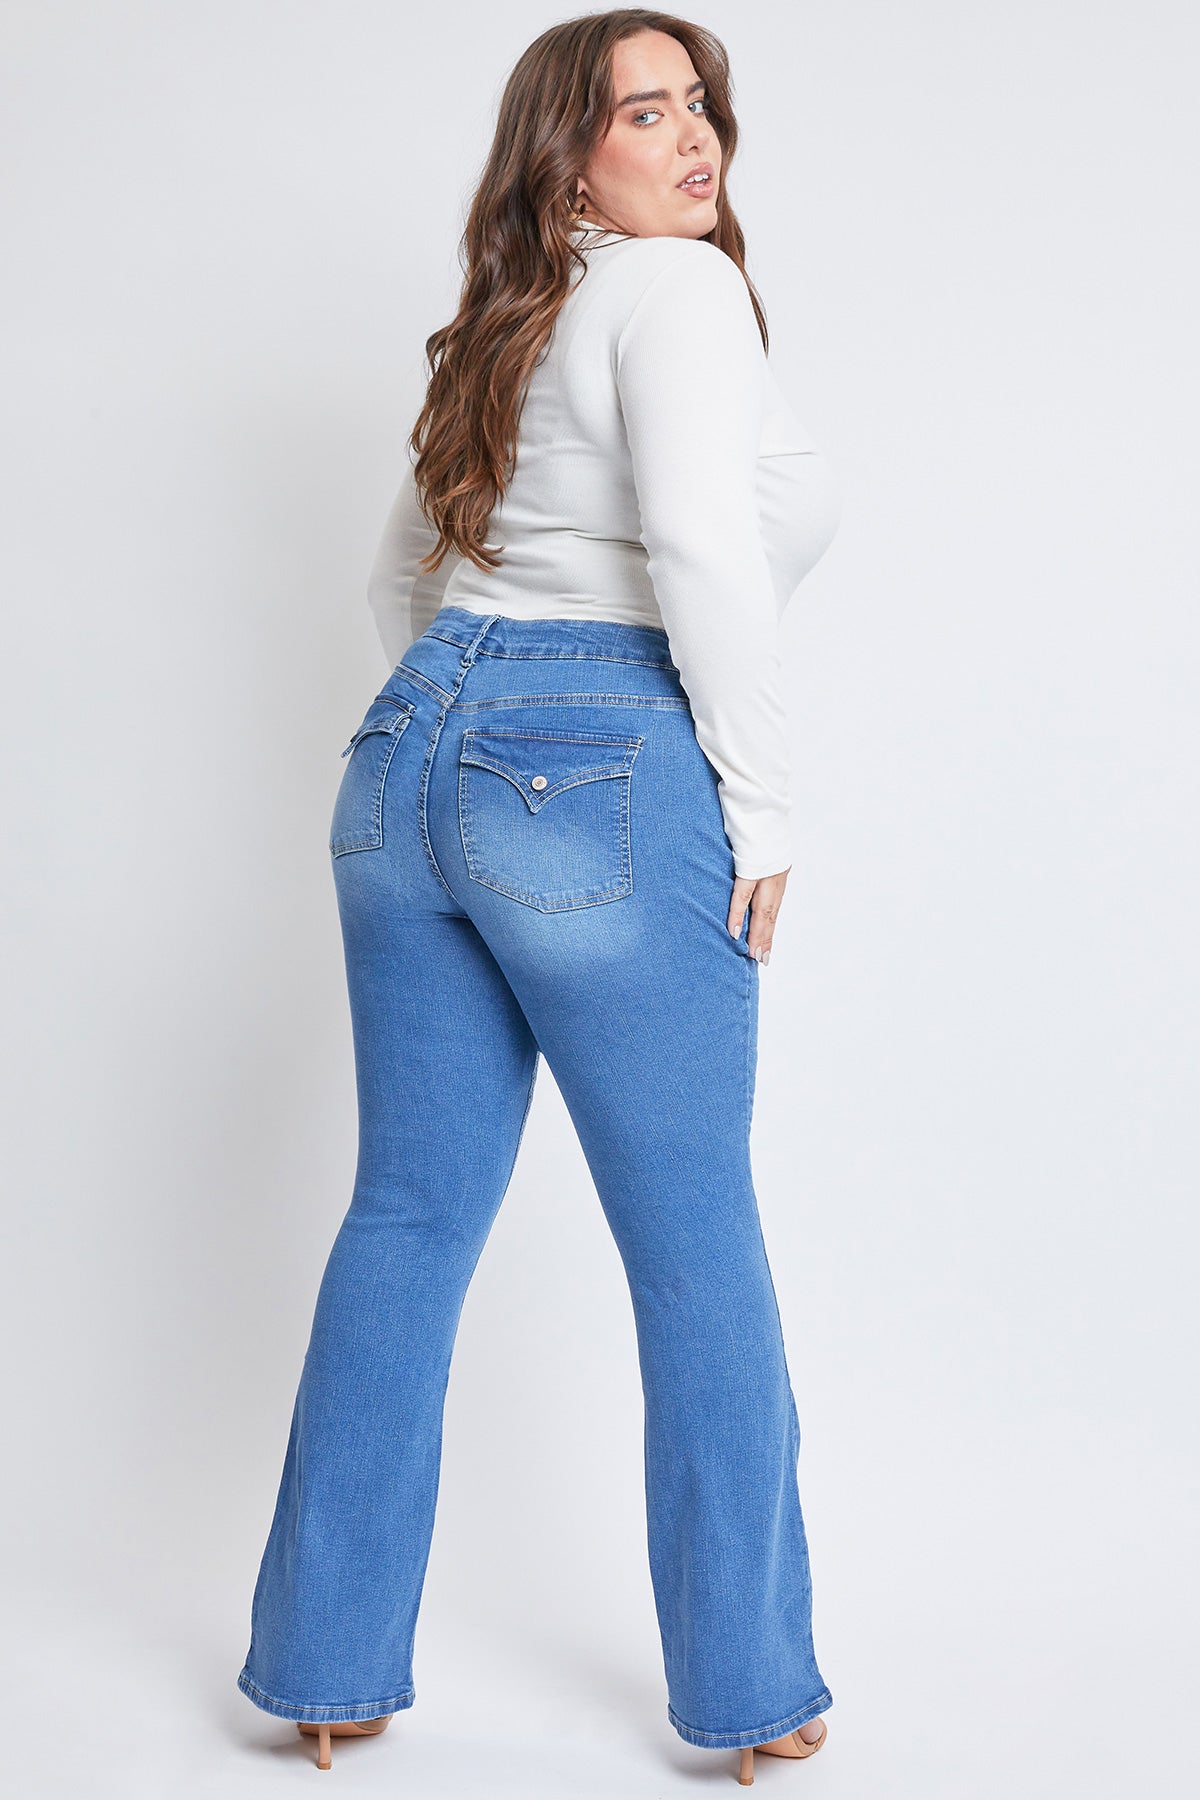 YMI Jeans Women´s Plus Size Sustainable Mid Rise Boot Cut Jeans